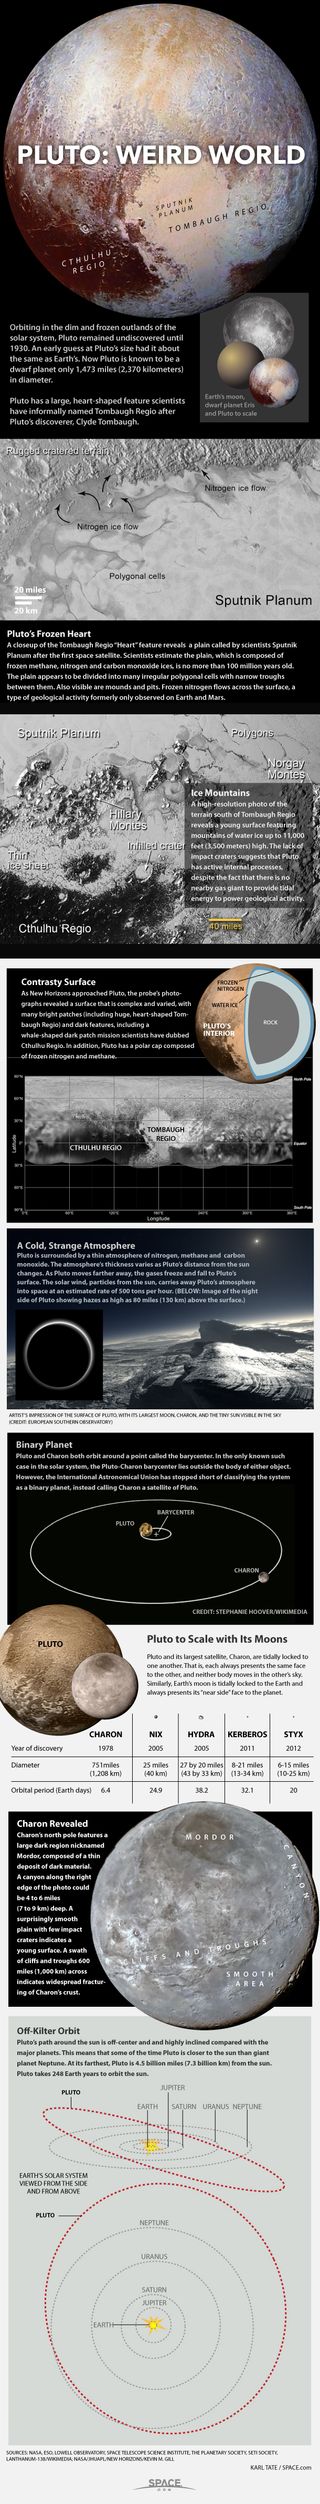 Pluto and its moons orbit the sun near the edge of our solar system. Learn all about Pluto's weirdly eccentric orbit, four moons and more in this Space.com infographic